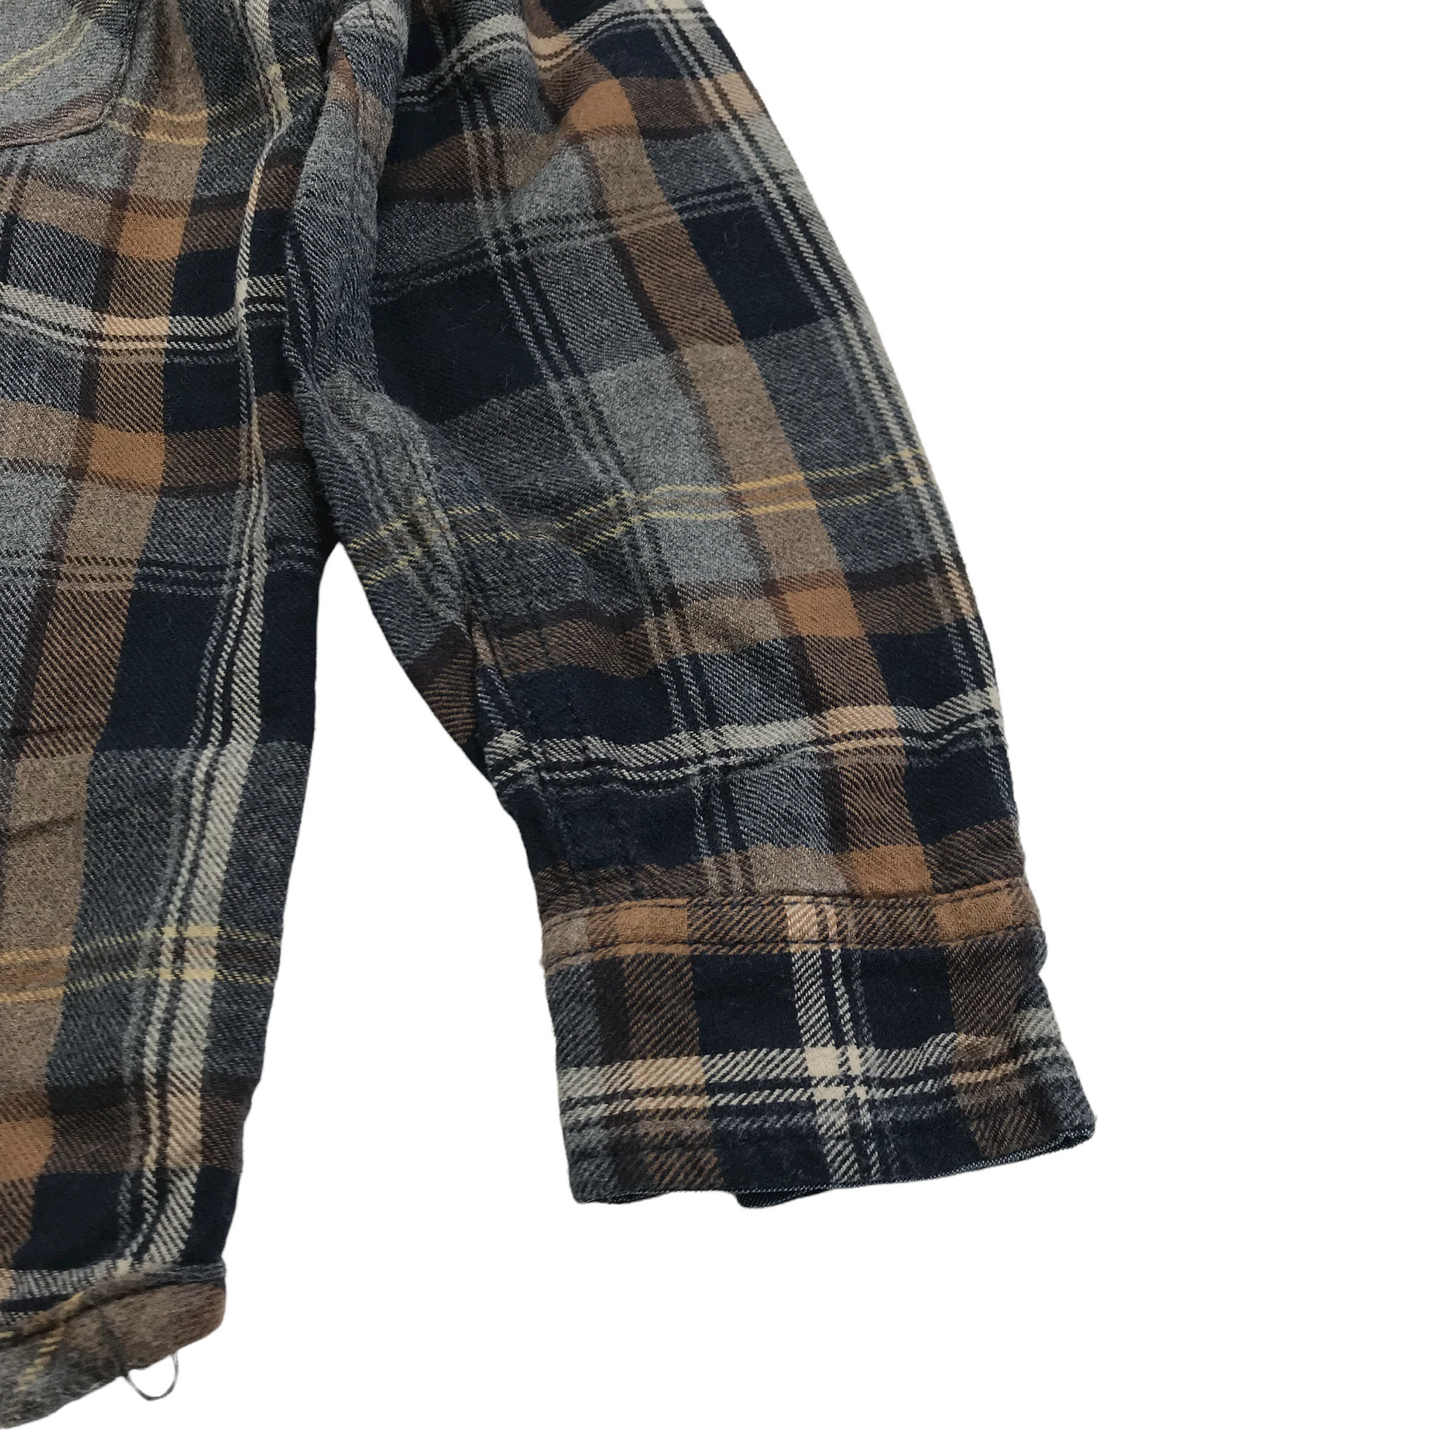 Next Brown and Navy Checked Jersey Lined Shirt Age 6